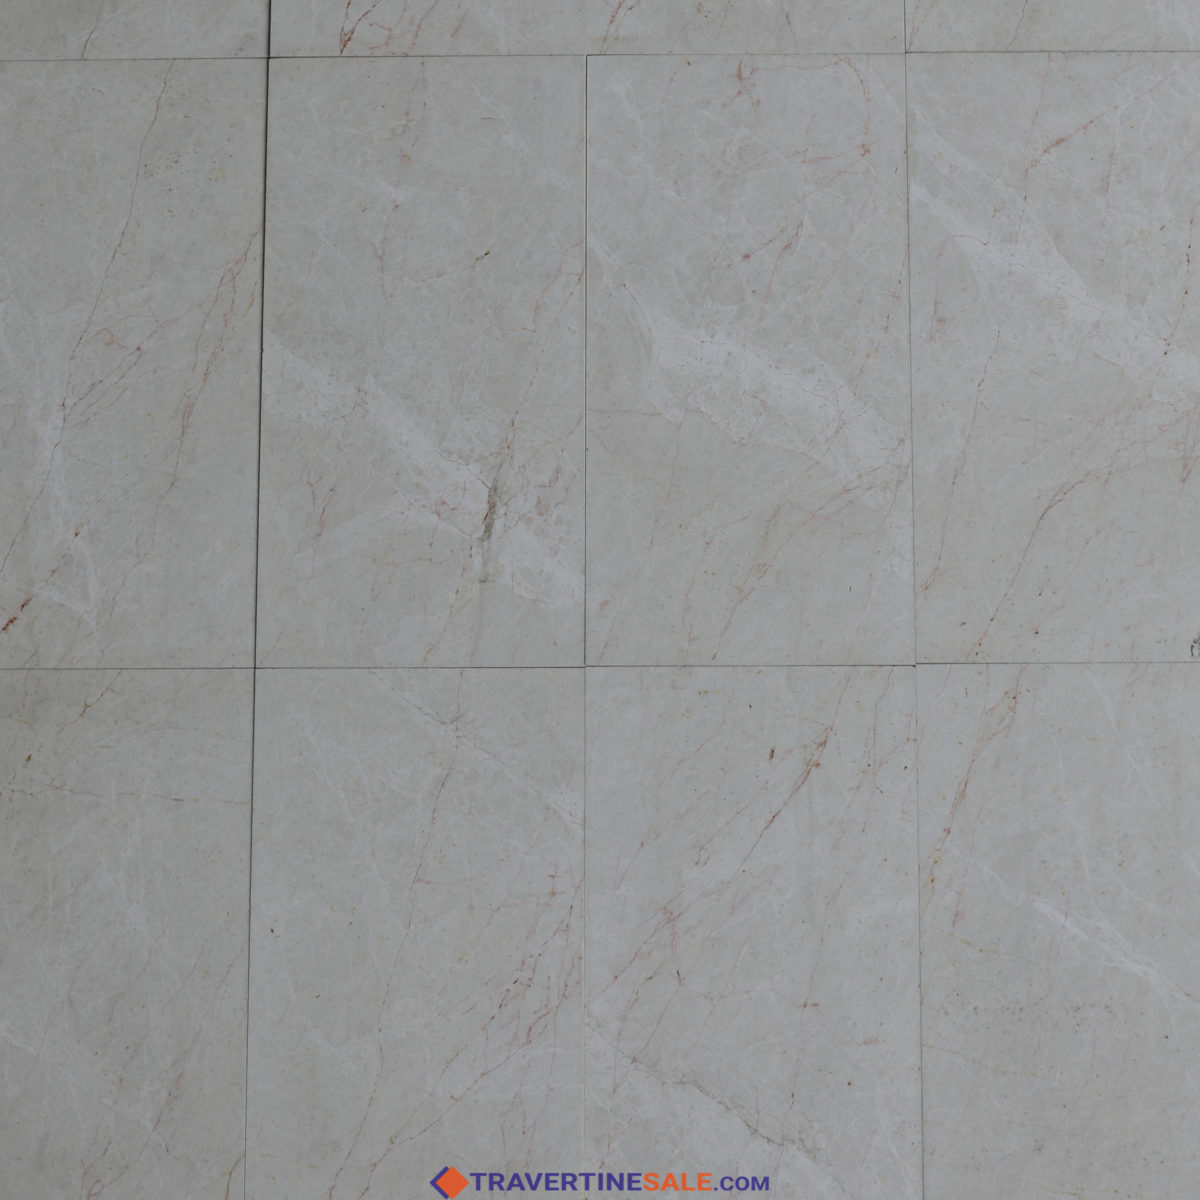 polished vanilla marble tiles with beige background and red veins